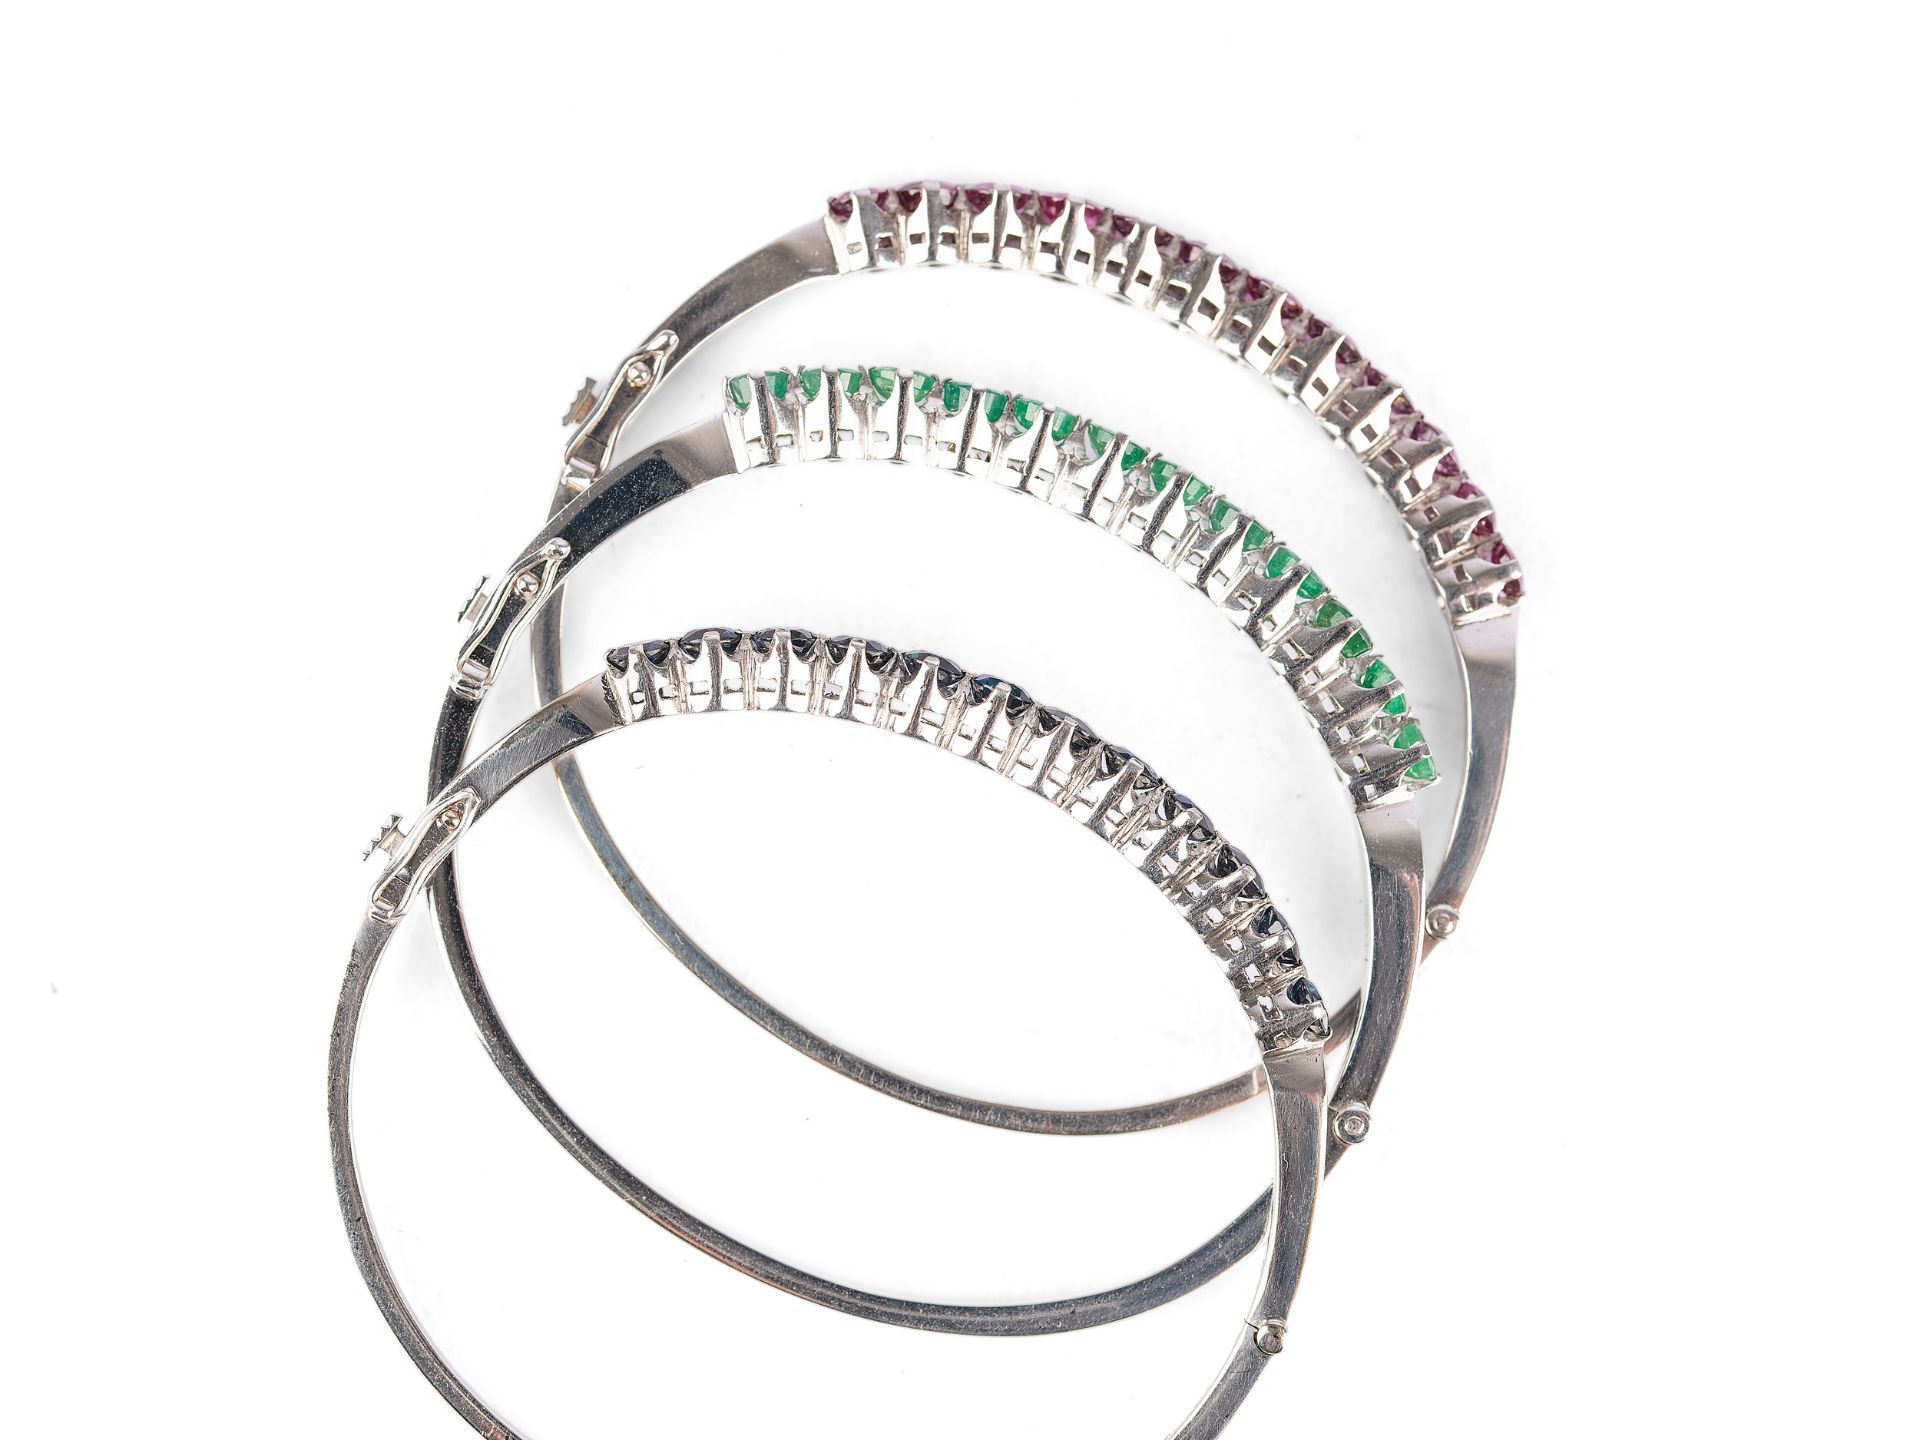 Mixed lot: 3 bangles, 14kt white gold marked, 12 sapphires, emeralds and rubies each? - Image 2 of 2